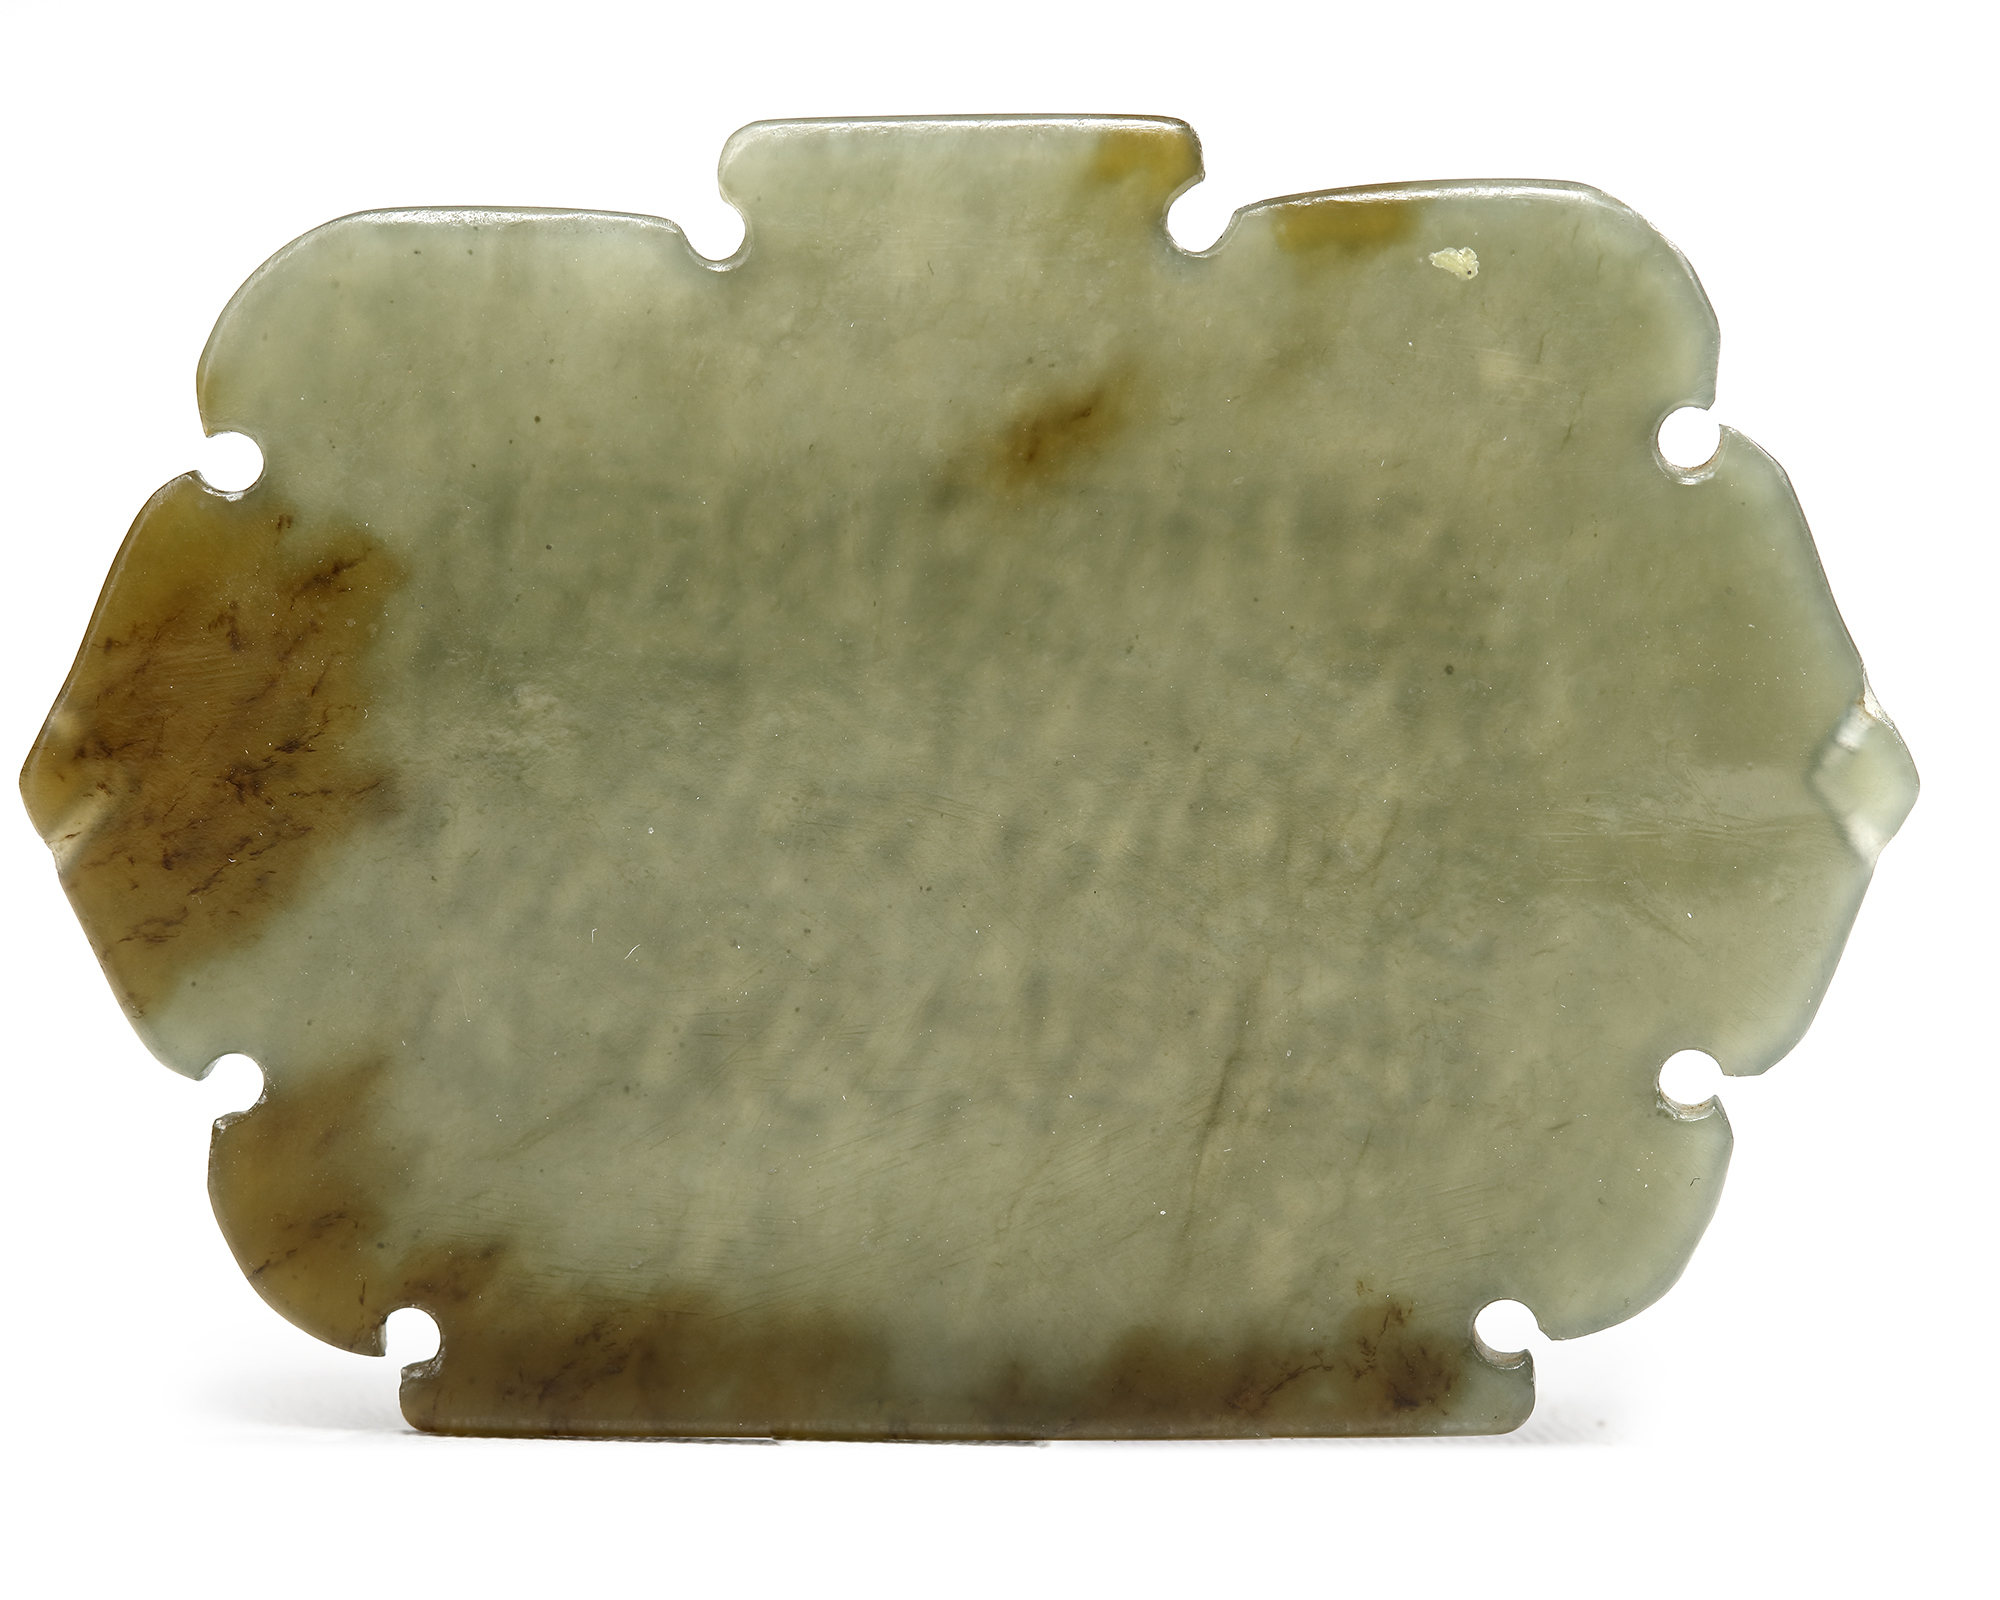 A MUGHAL CARVED JADE PLAQUE, NORTHERN INDIA, 18TH CENTURY - Image 2 of 3